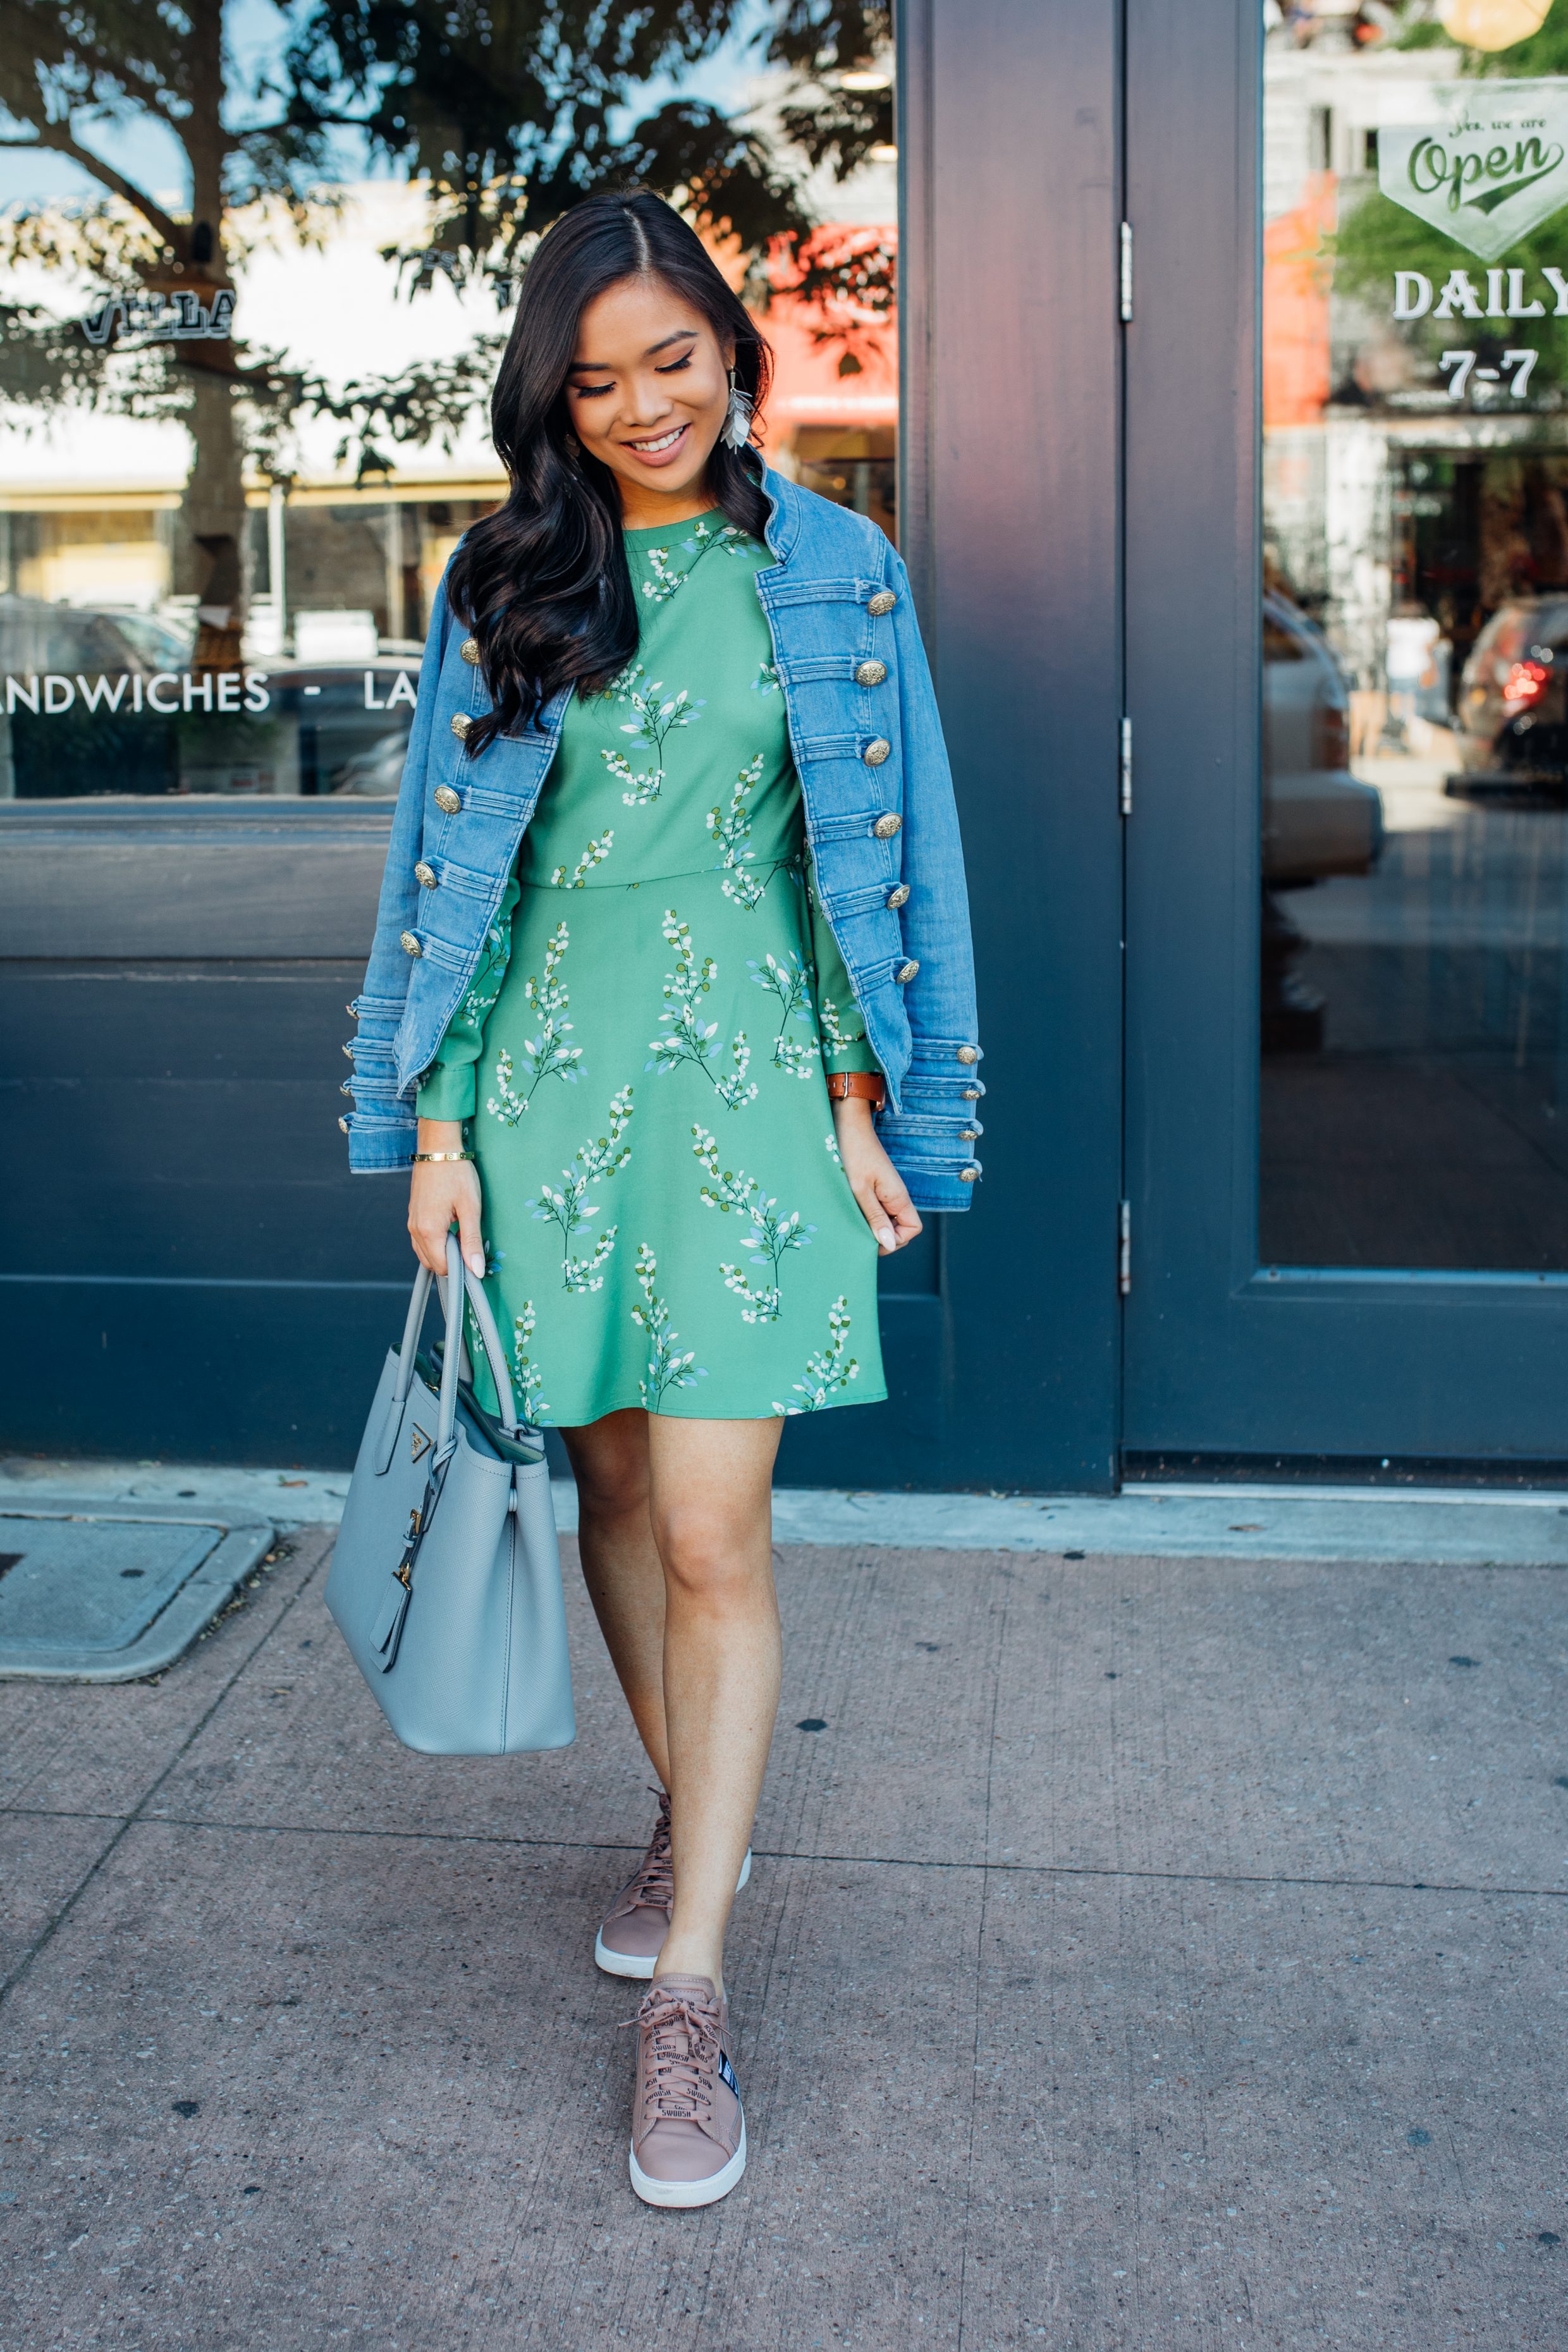 Blogger Hoang-Kim wears a floral dress with Nike sneakers and a denim jacker